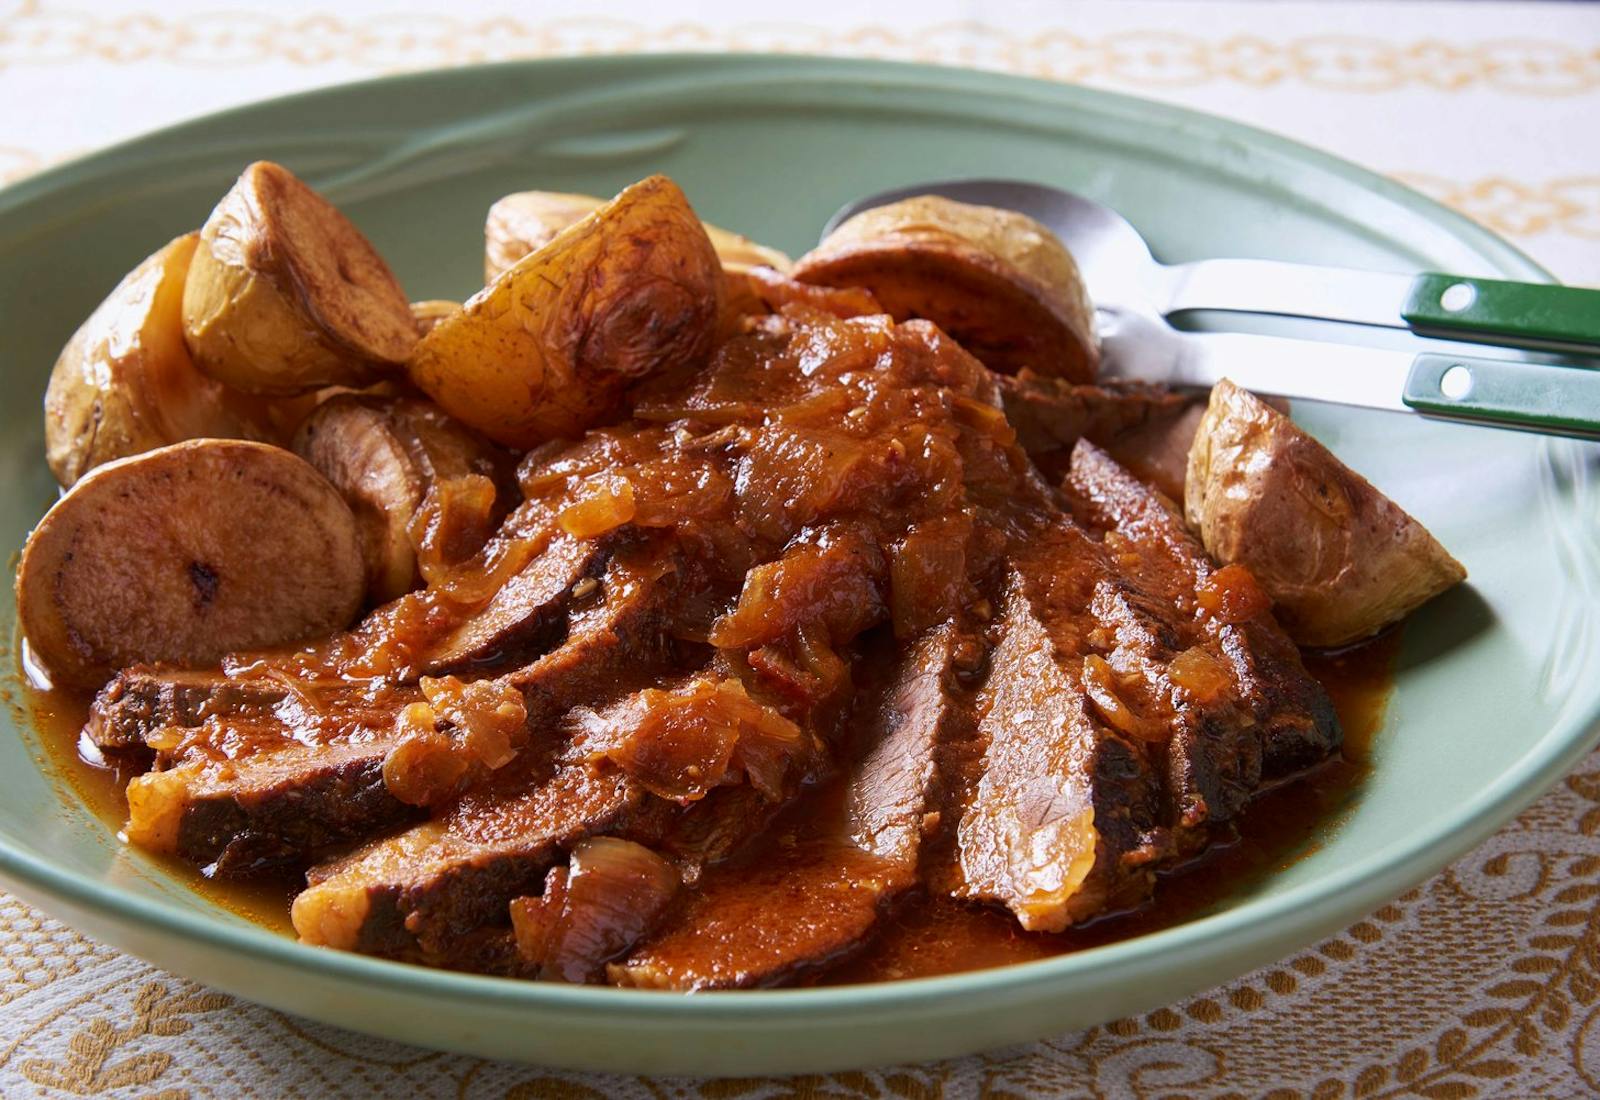 Sliced beef brisket coated with sauce alongside roasted baby potatoes in muted green dish with green serving utensils.